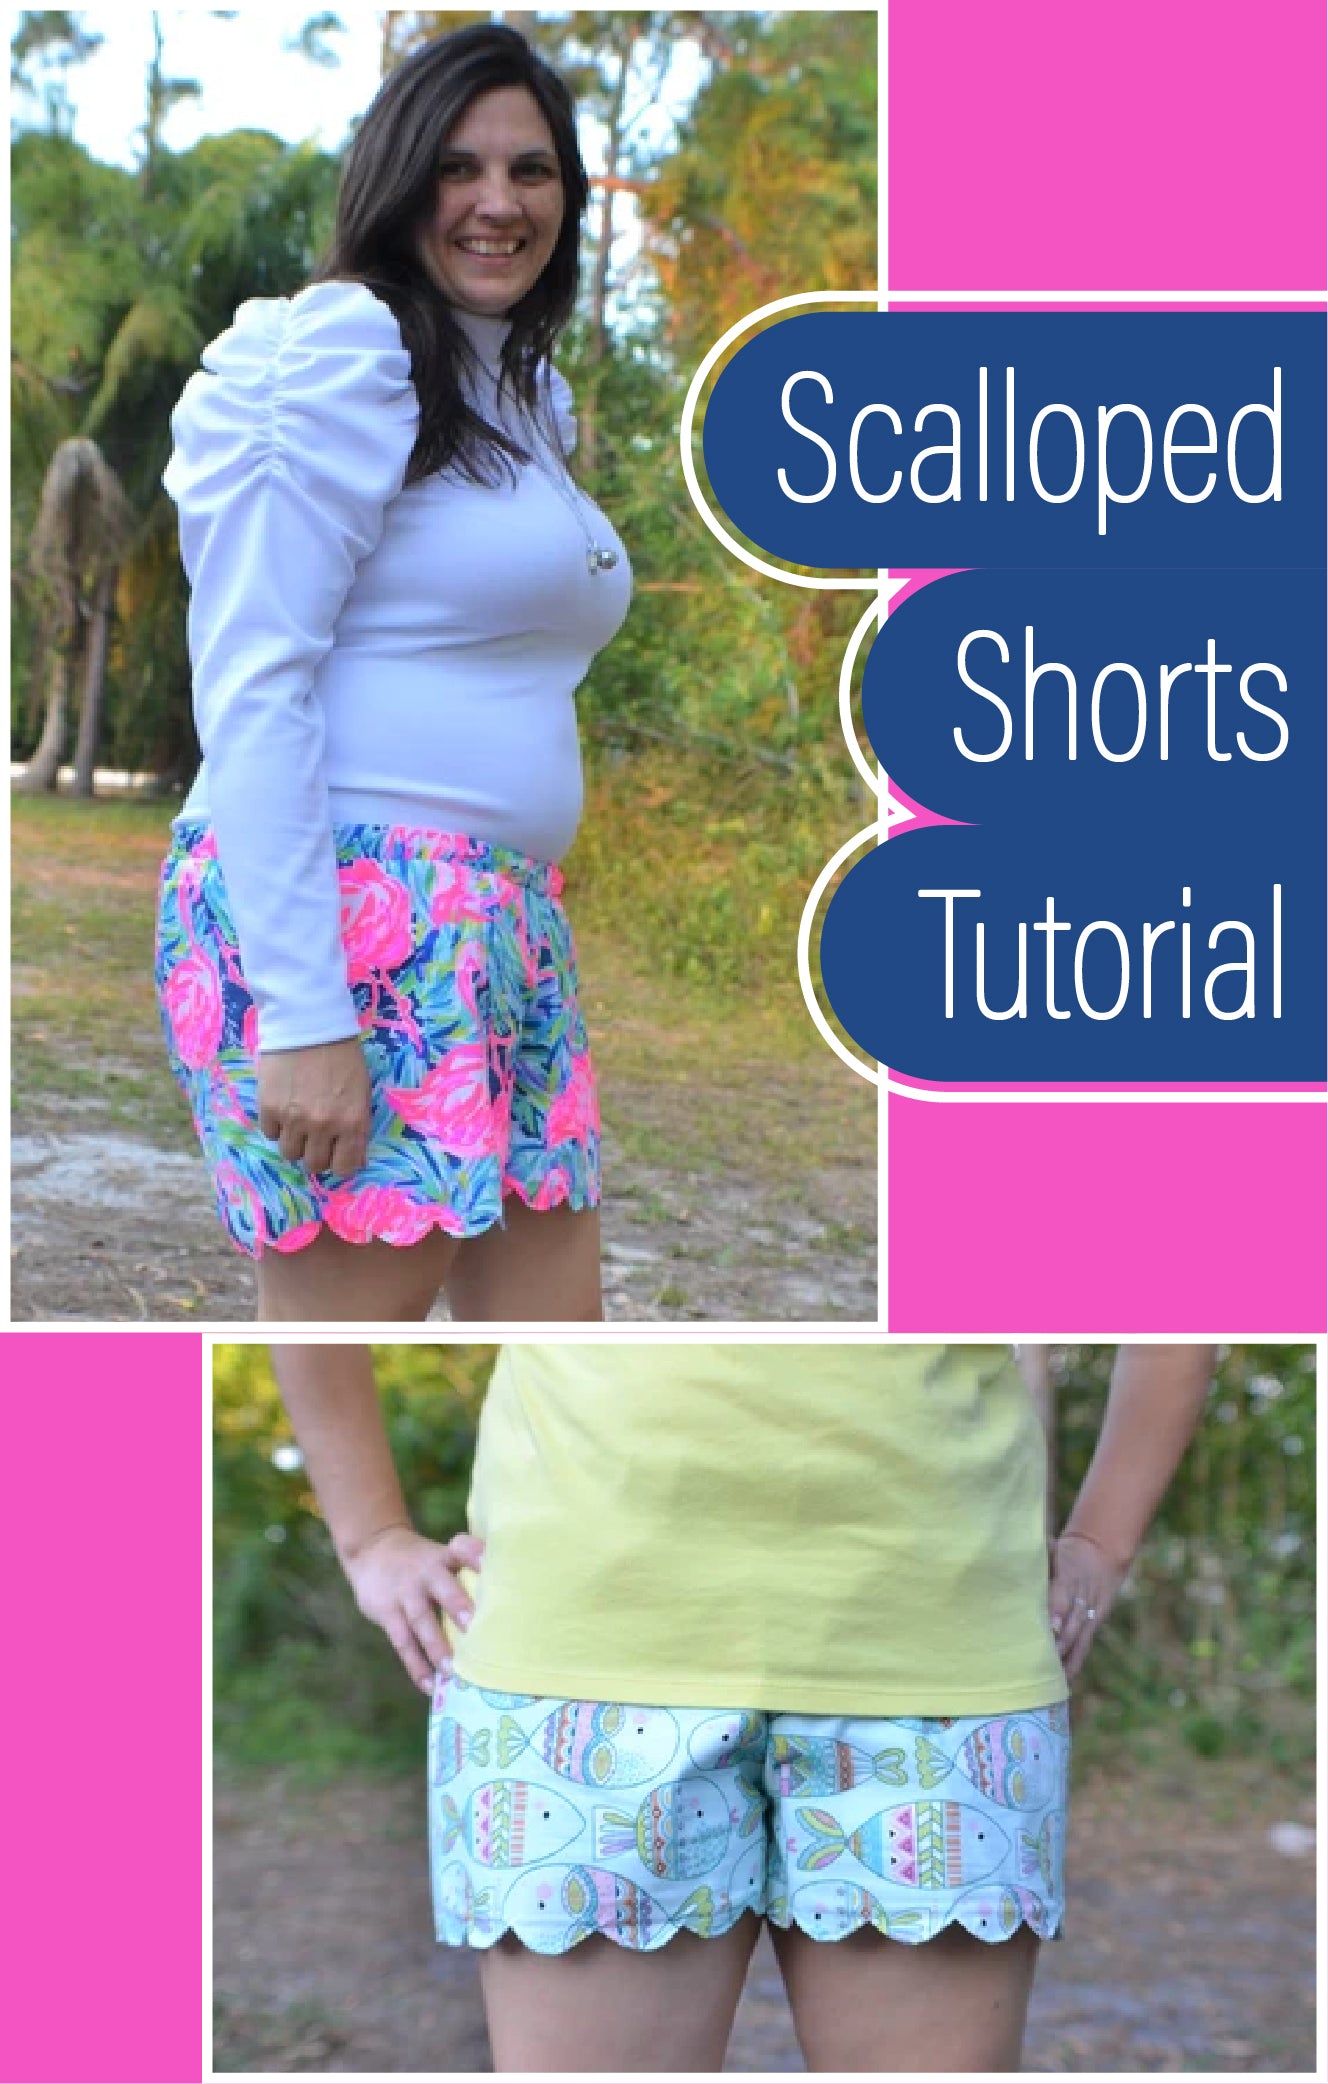 Create Your Own Scalloped Shorts!